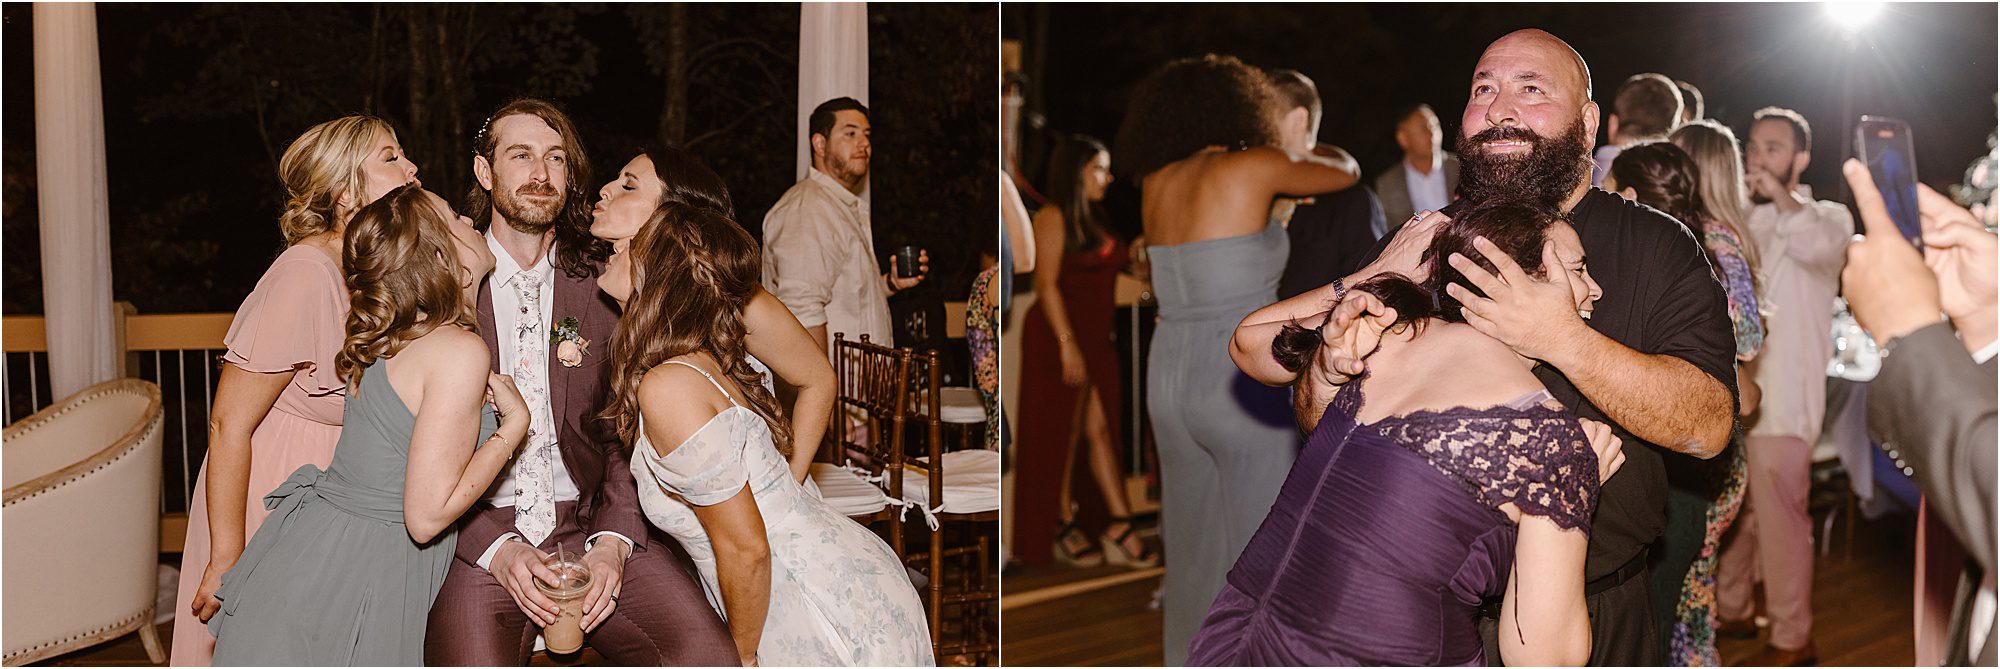 bridesmaids have fun with groom and dance at wedding reception